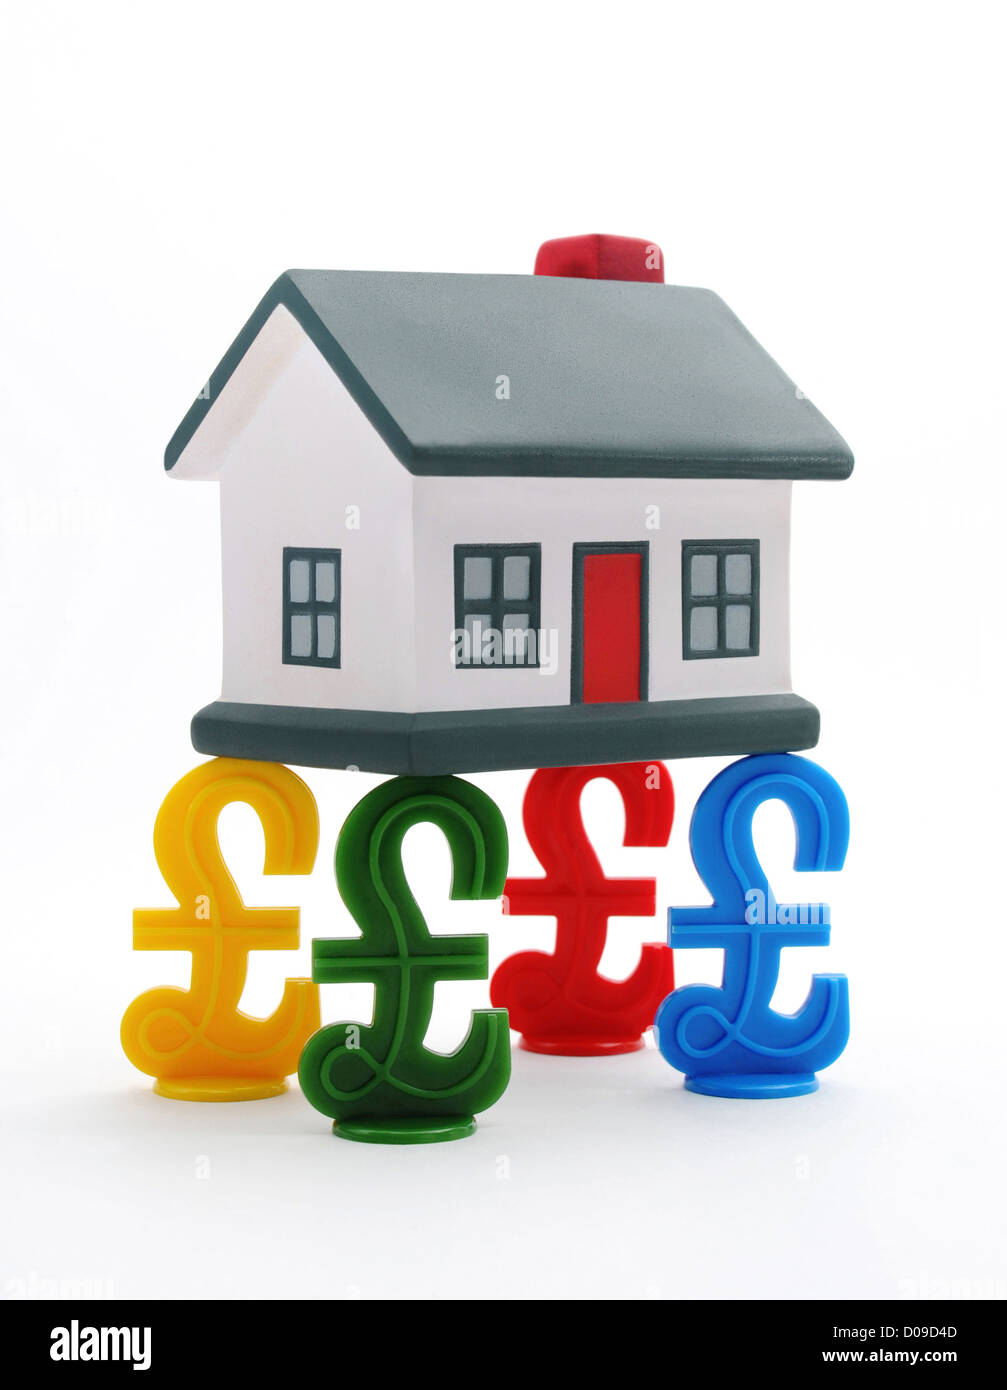 HOUSE BALANCED ON BRITISH POUND SIGNS RE HOUSE PRICES HOUSING PROPERTY MARKET MORTGAGES VALUES BUYERS SELLERS FIRST TIME SAVINGS Stock Photo